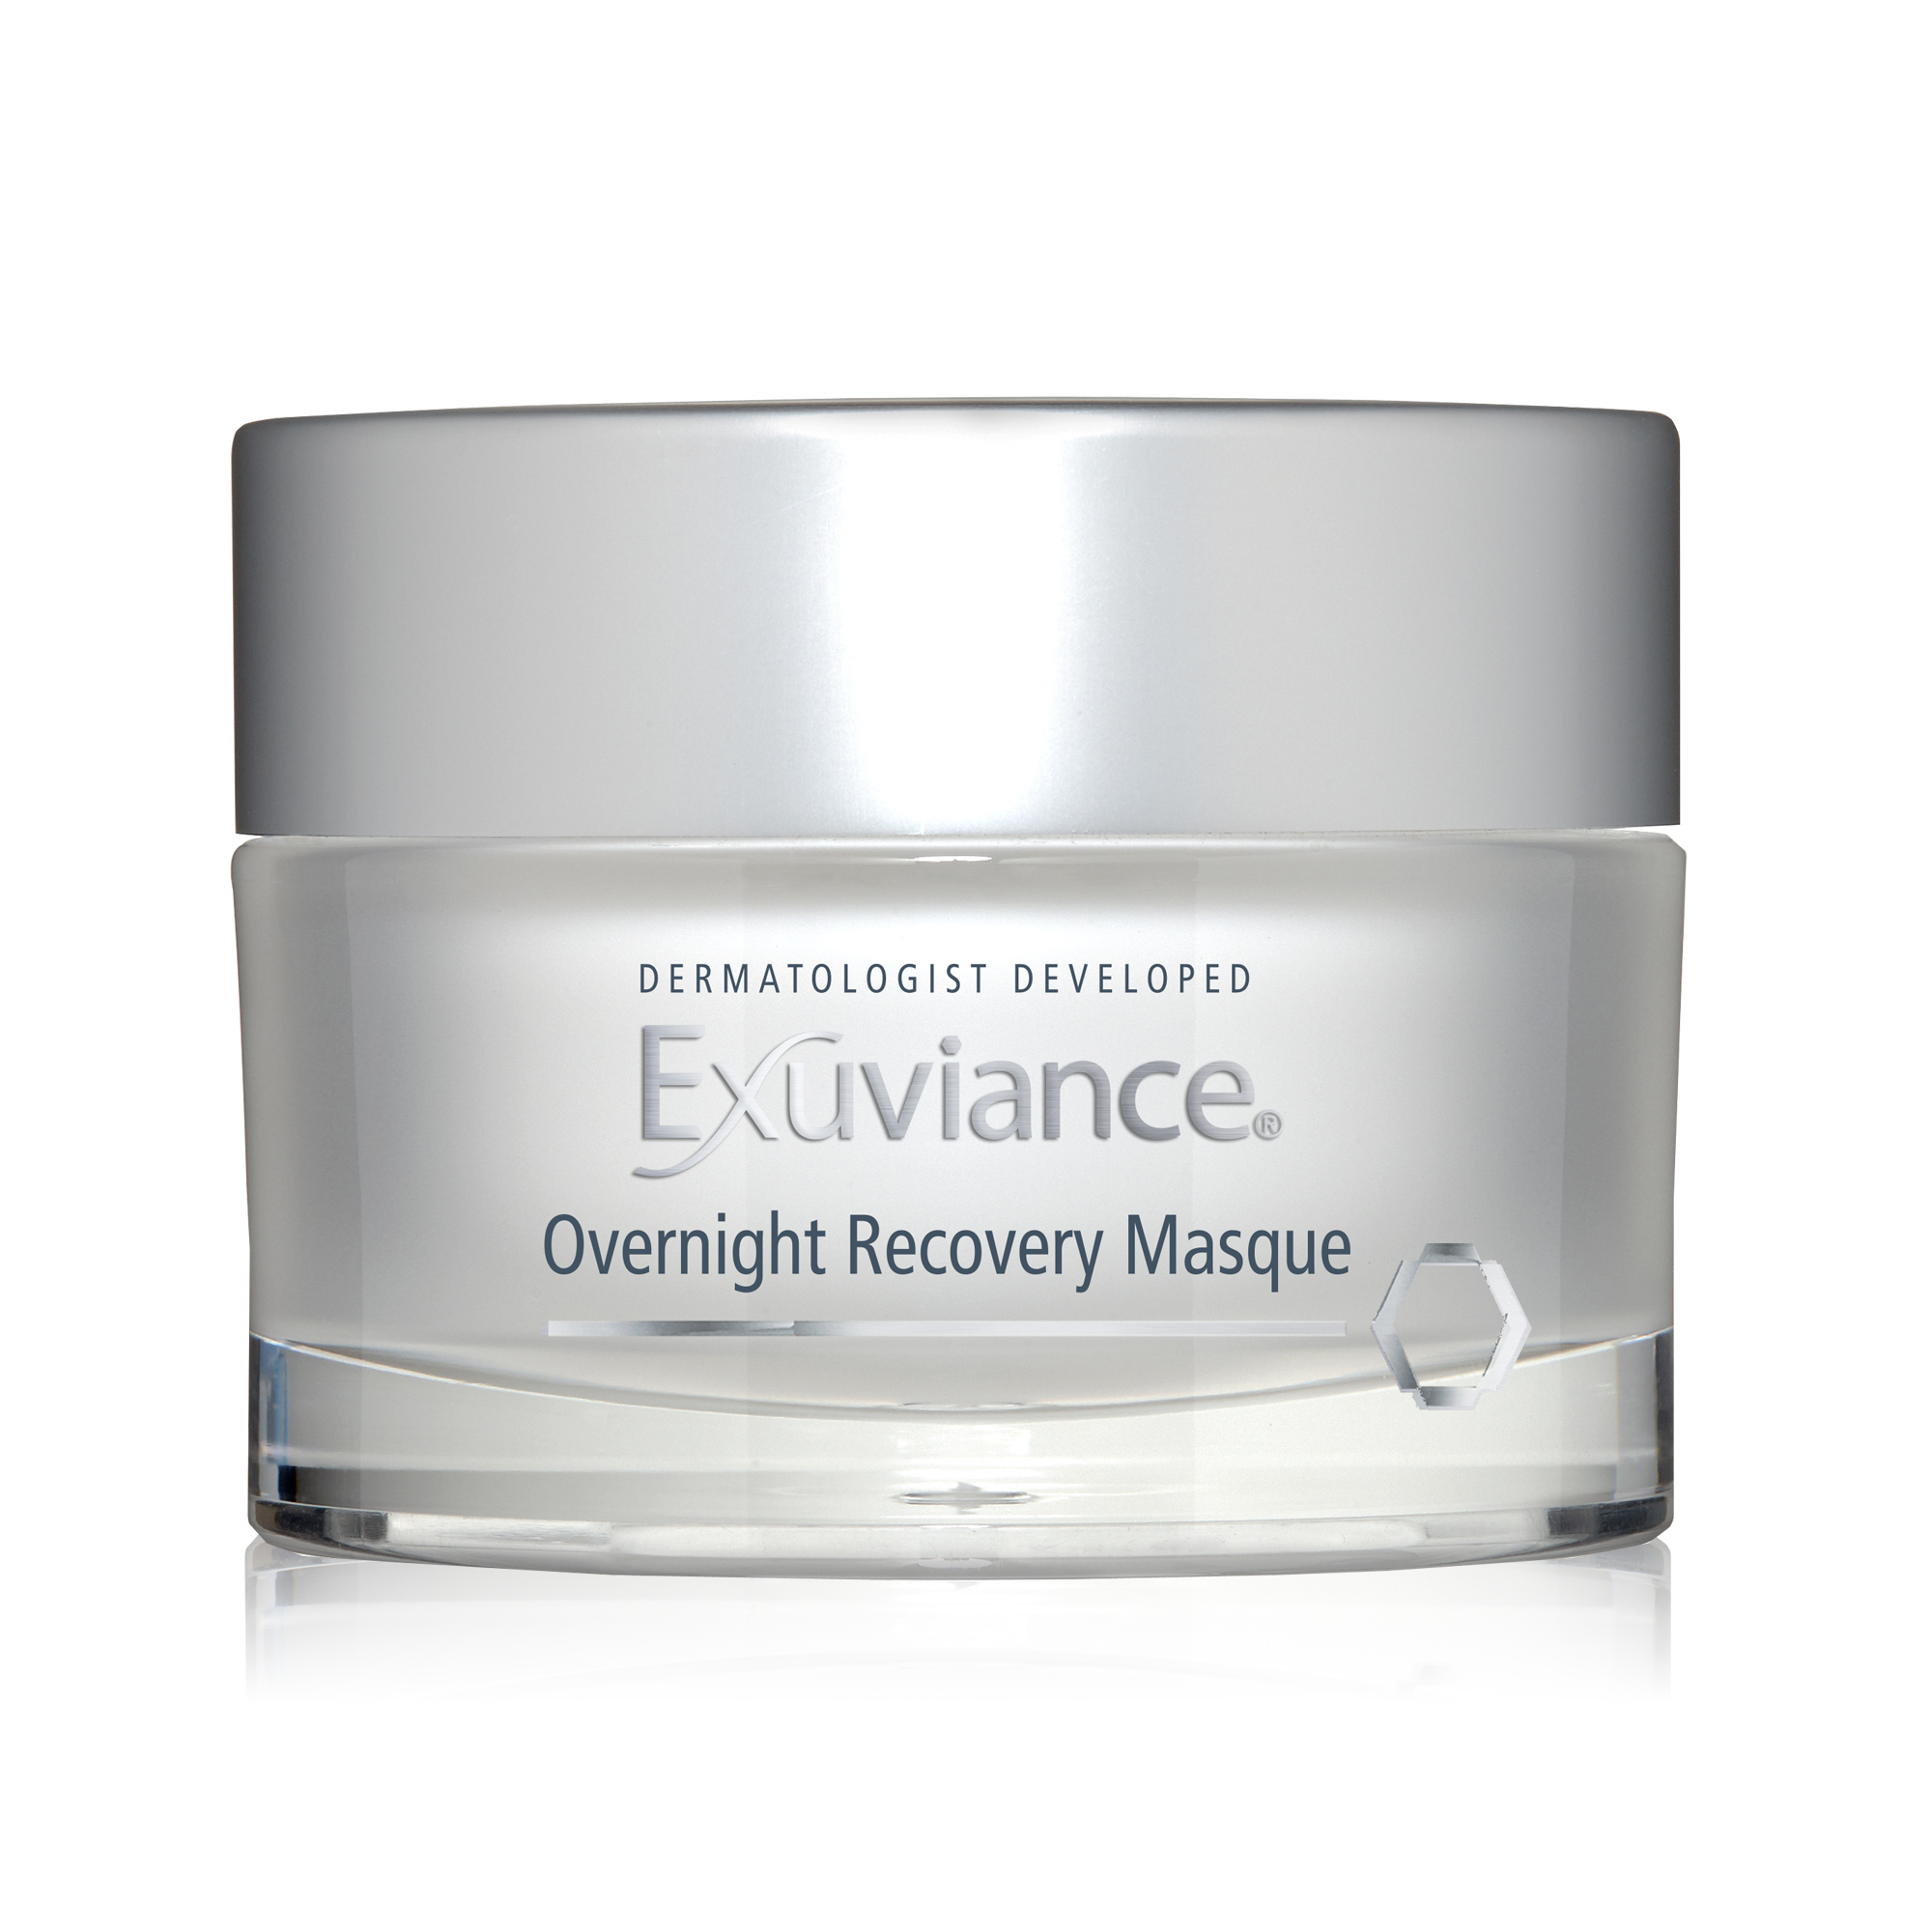 Exuviance Overnight Recovery Masque Review